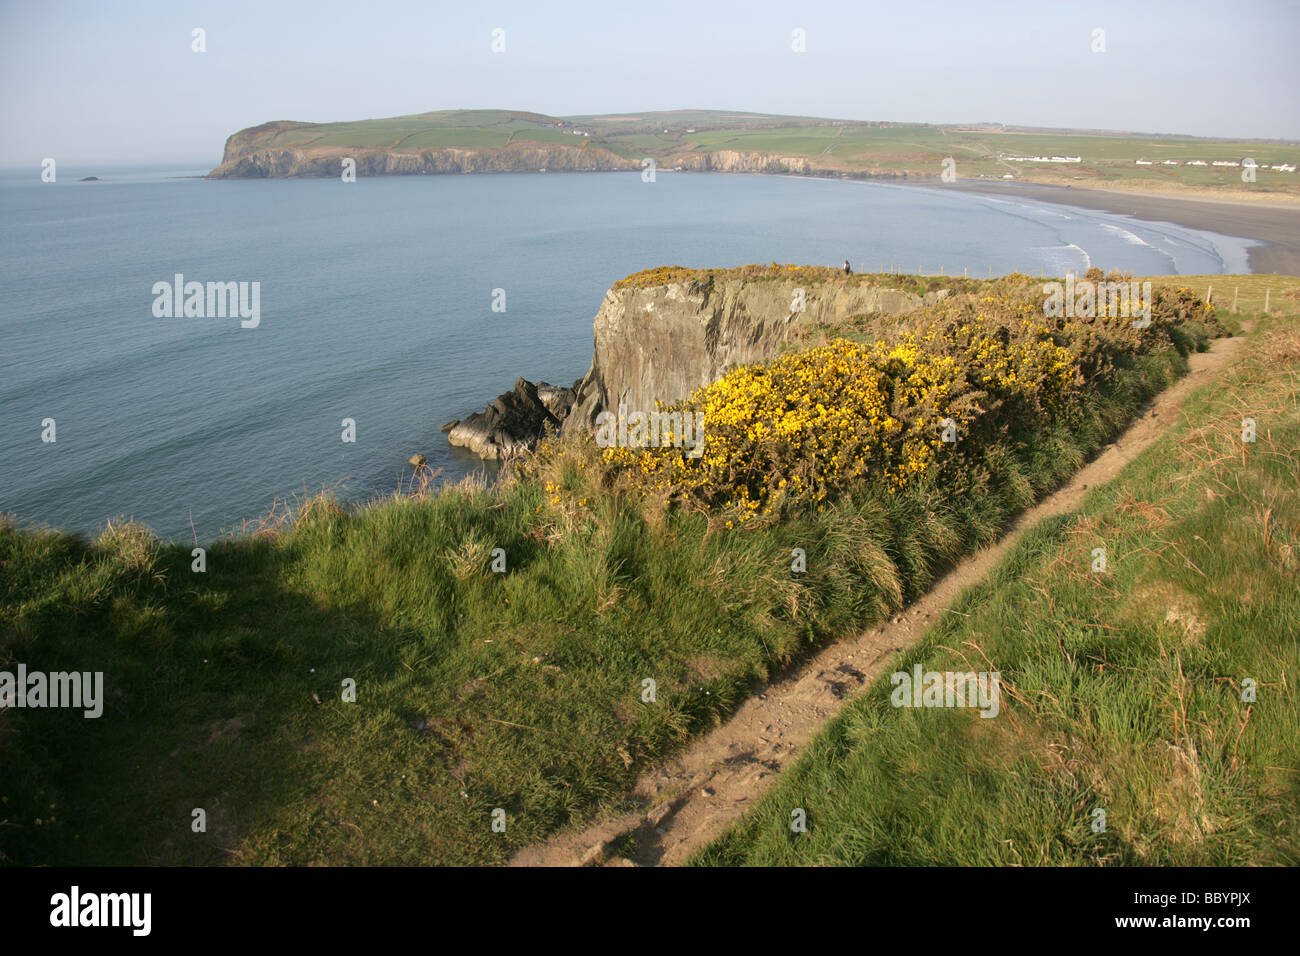 Town of Newport Parrog, Wales. The Newport Parrog section of the 186 mile long Pembrokeshire Coastal Path. Stock Photo